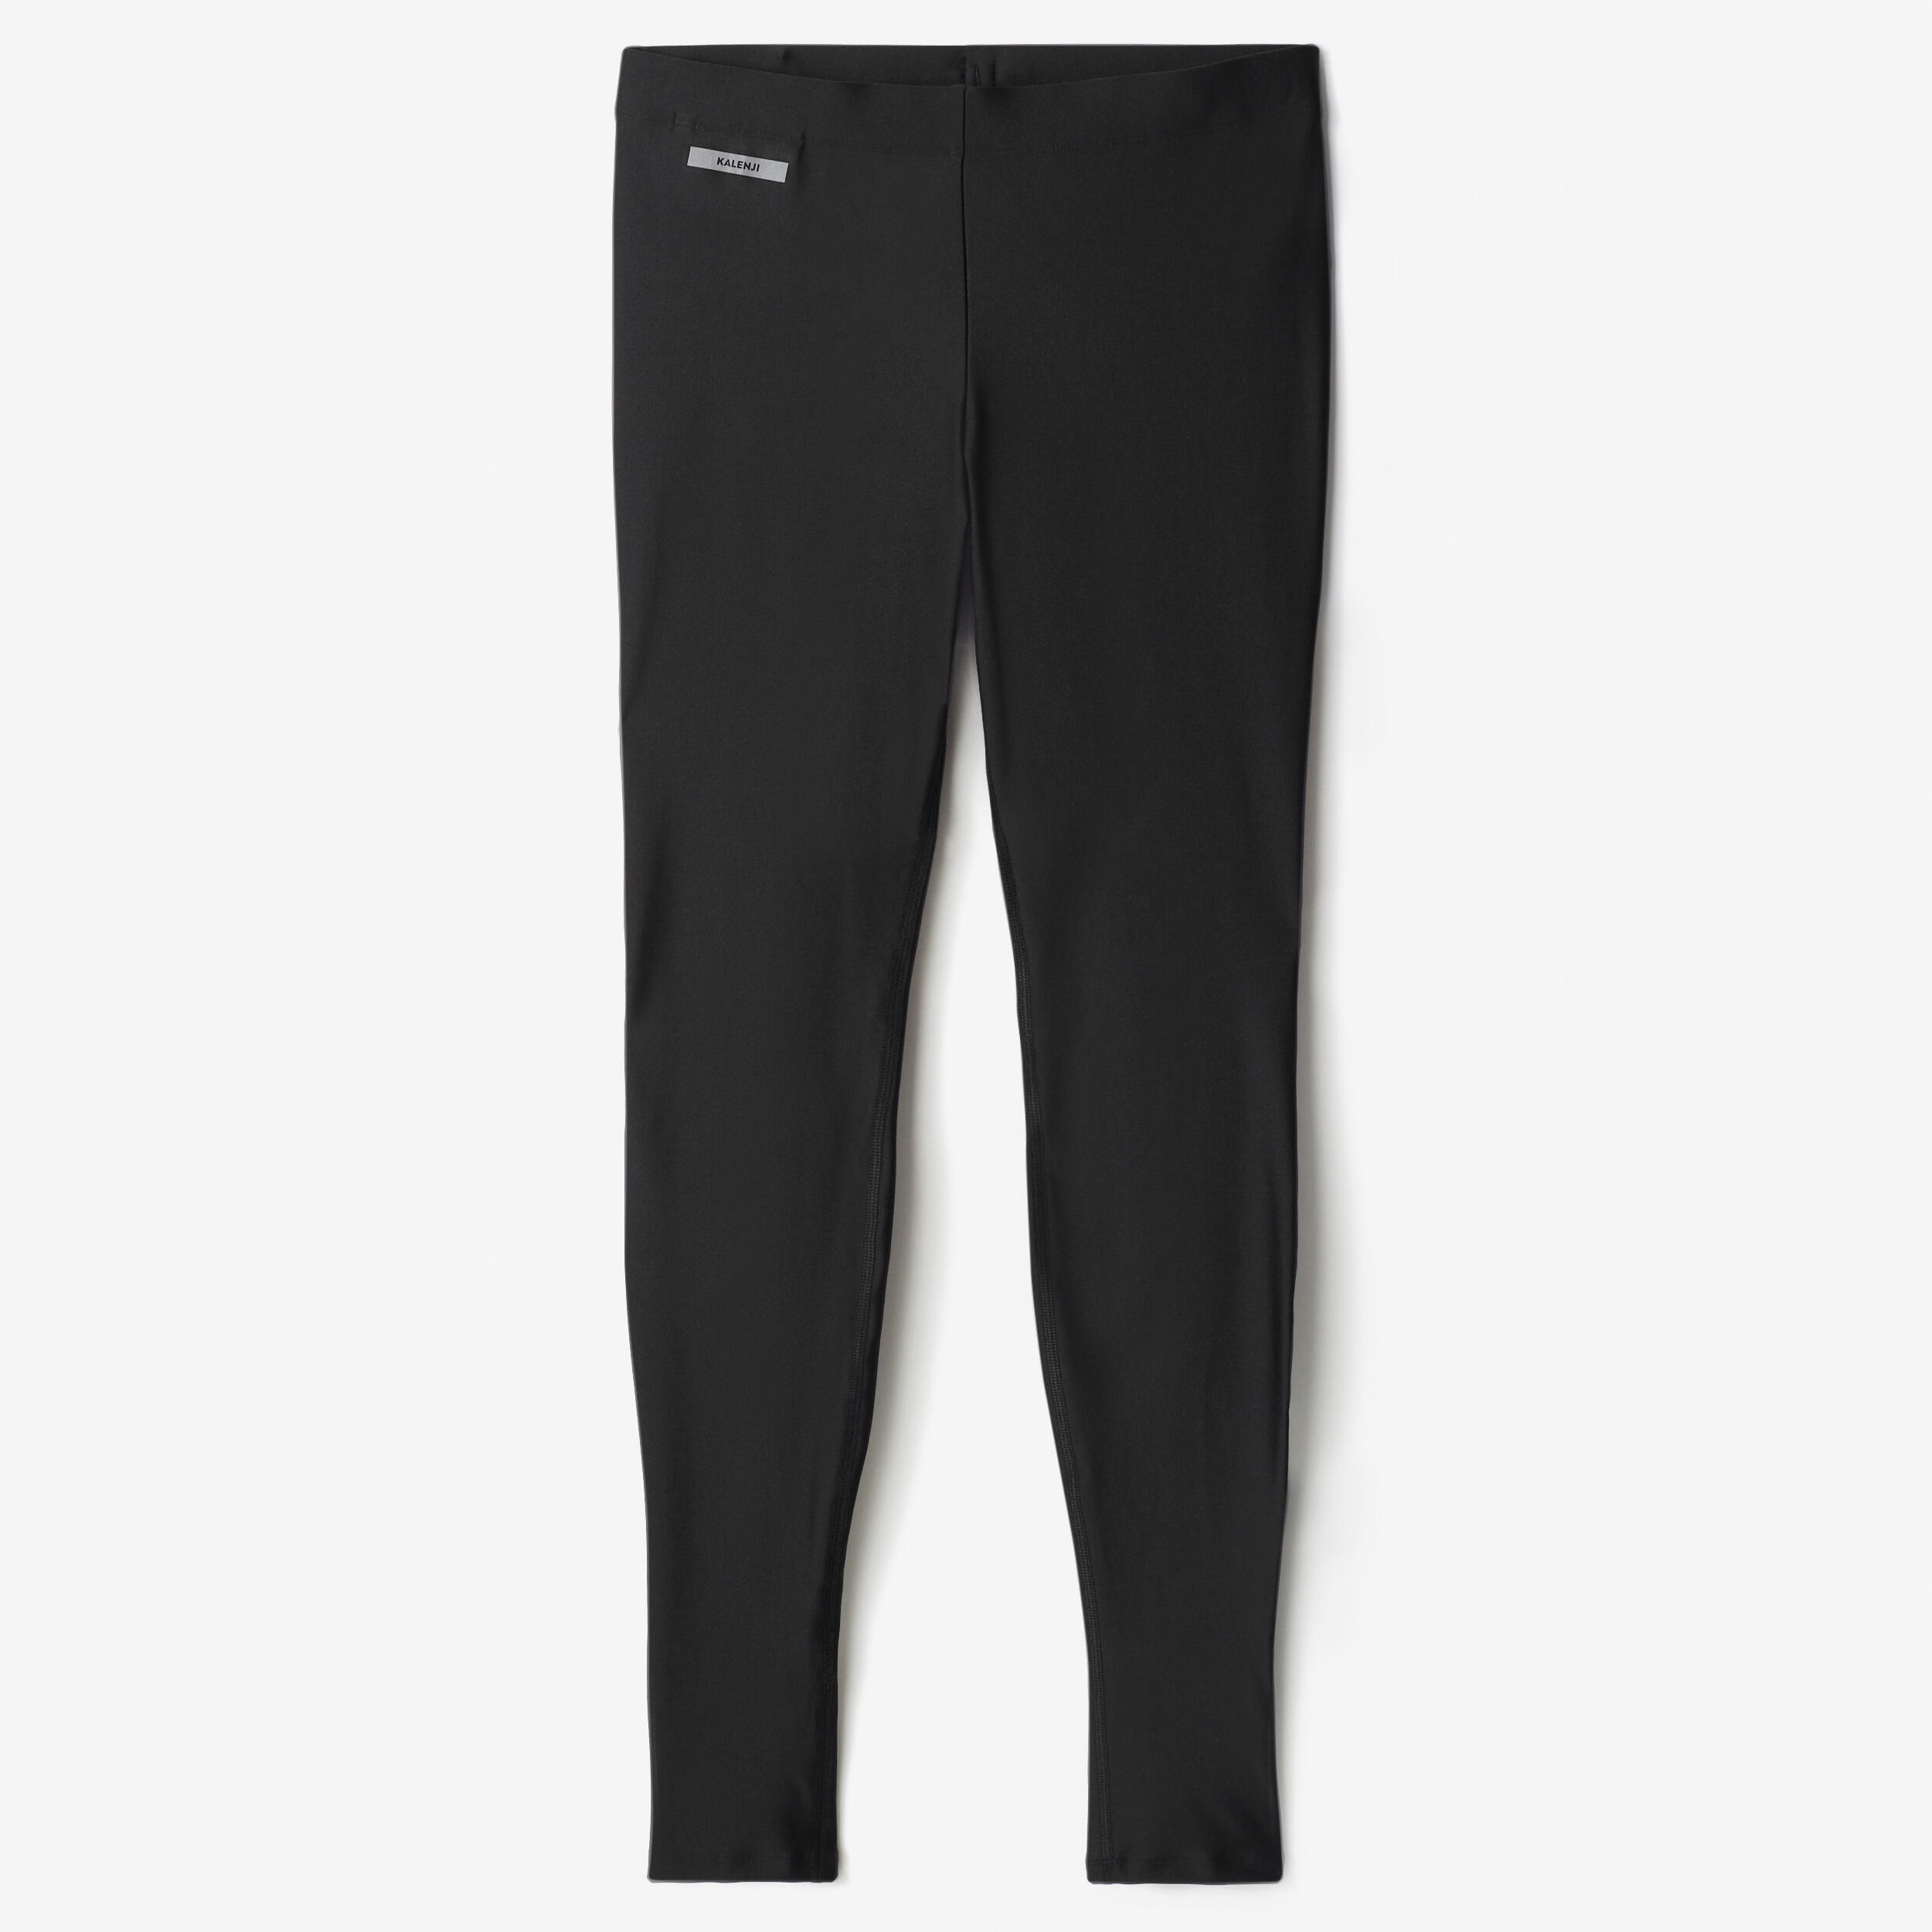 Patagonia Endless Run Tights  Running Trousers Mens  Free UK Delivery   Alpinetrekcouk